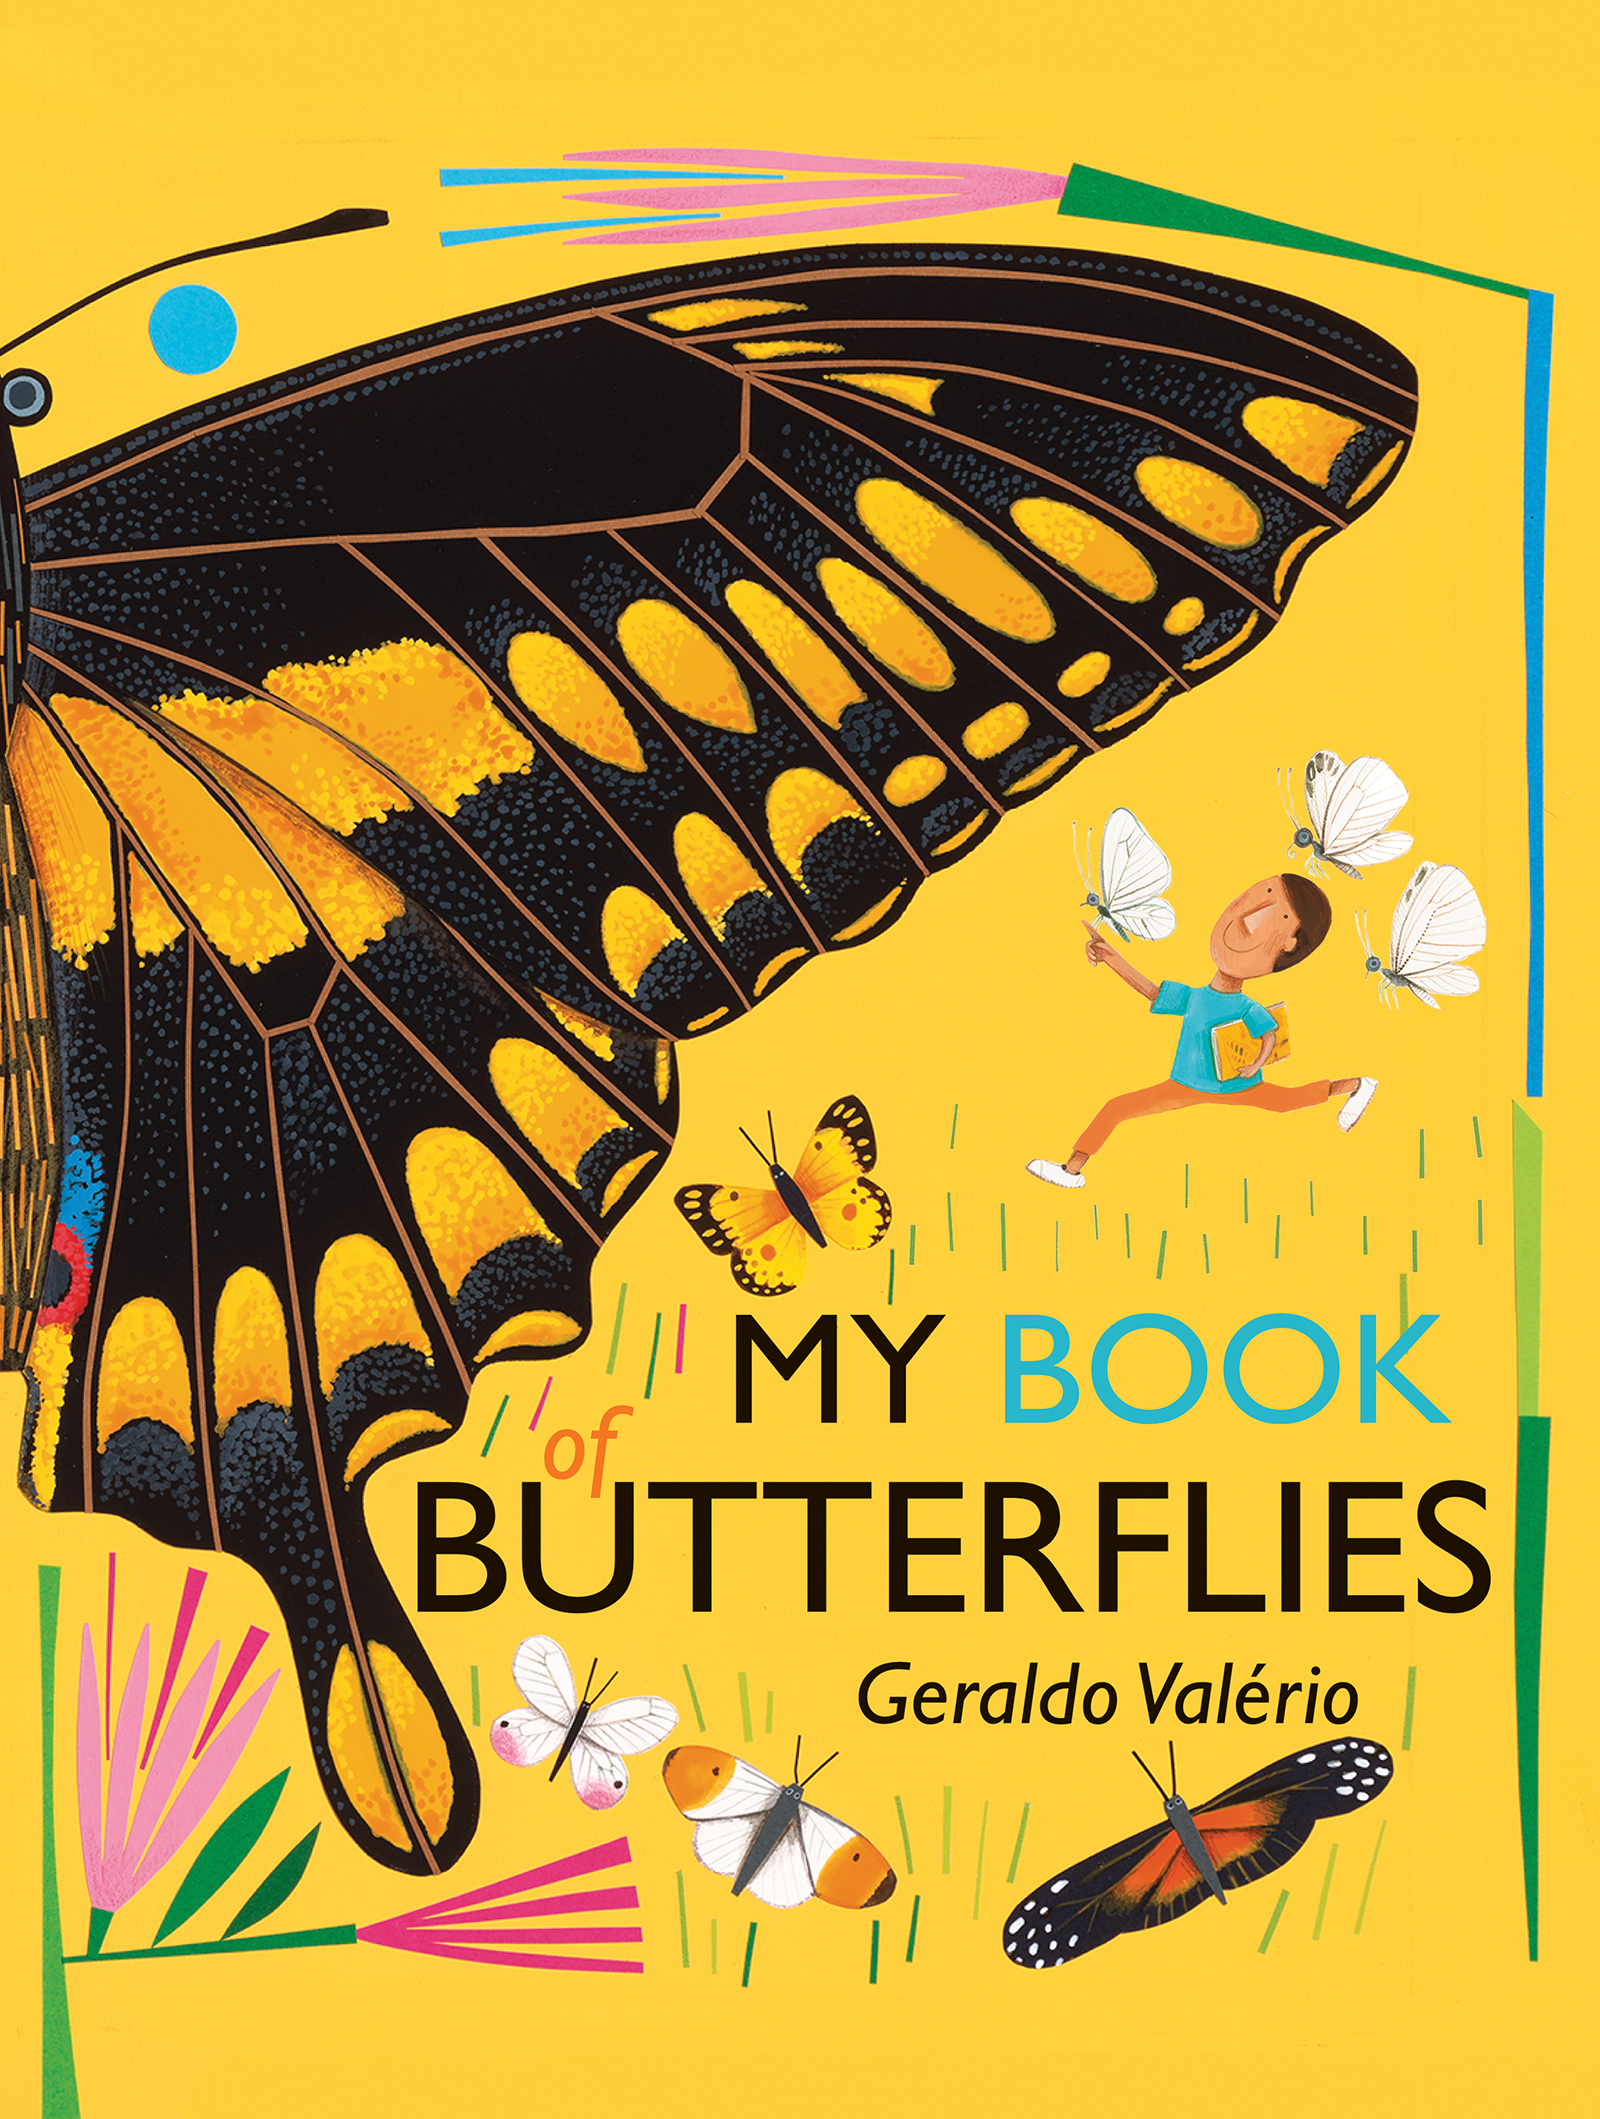 My Book of Butterflies book cover